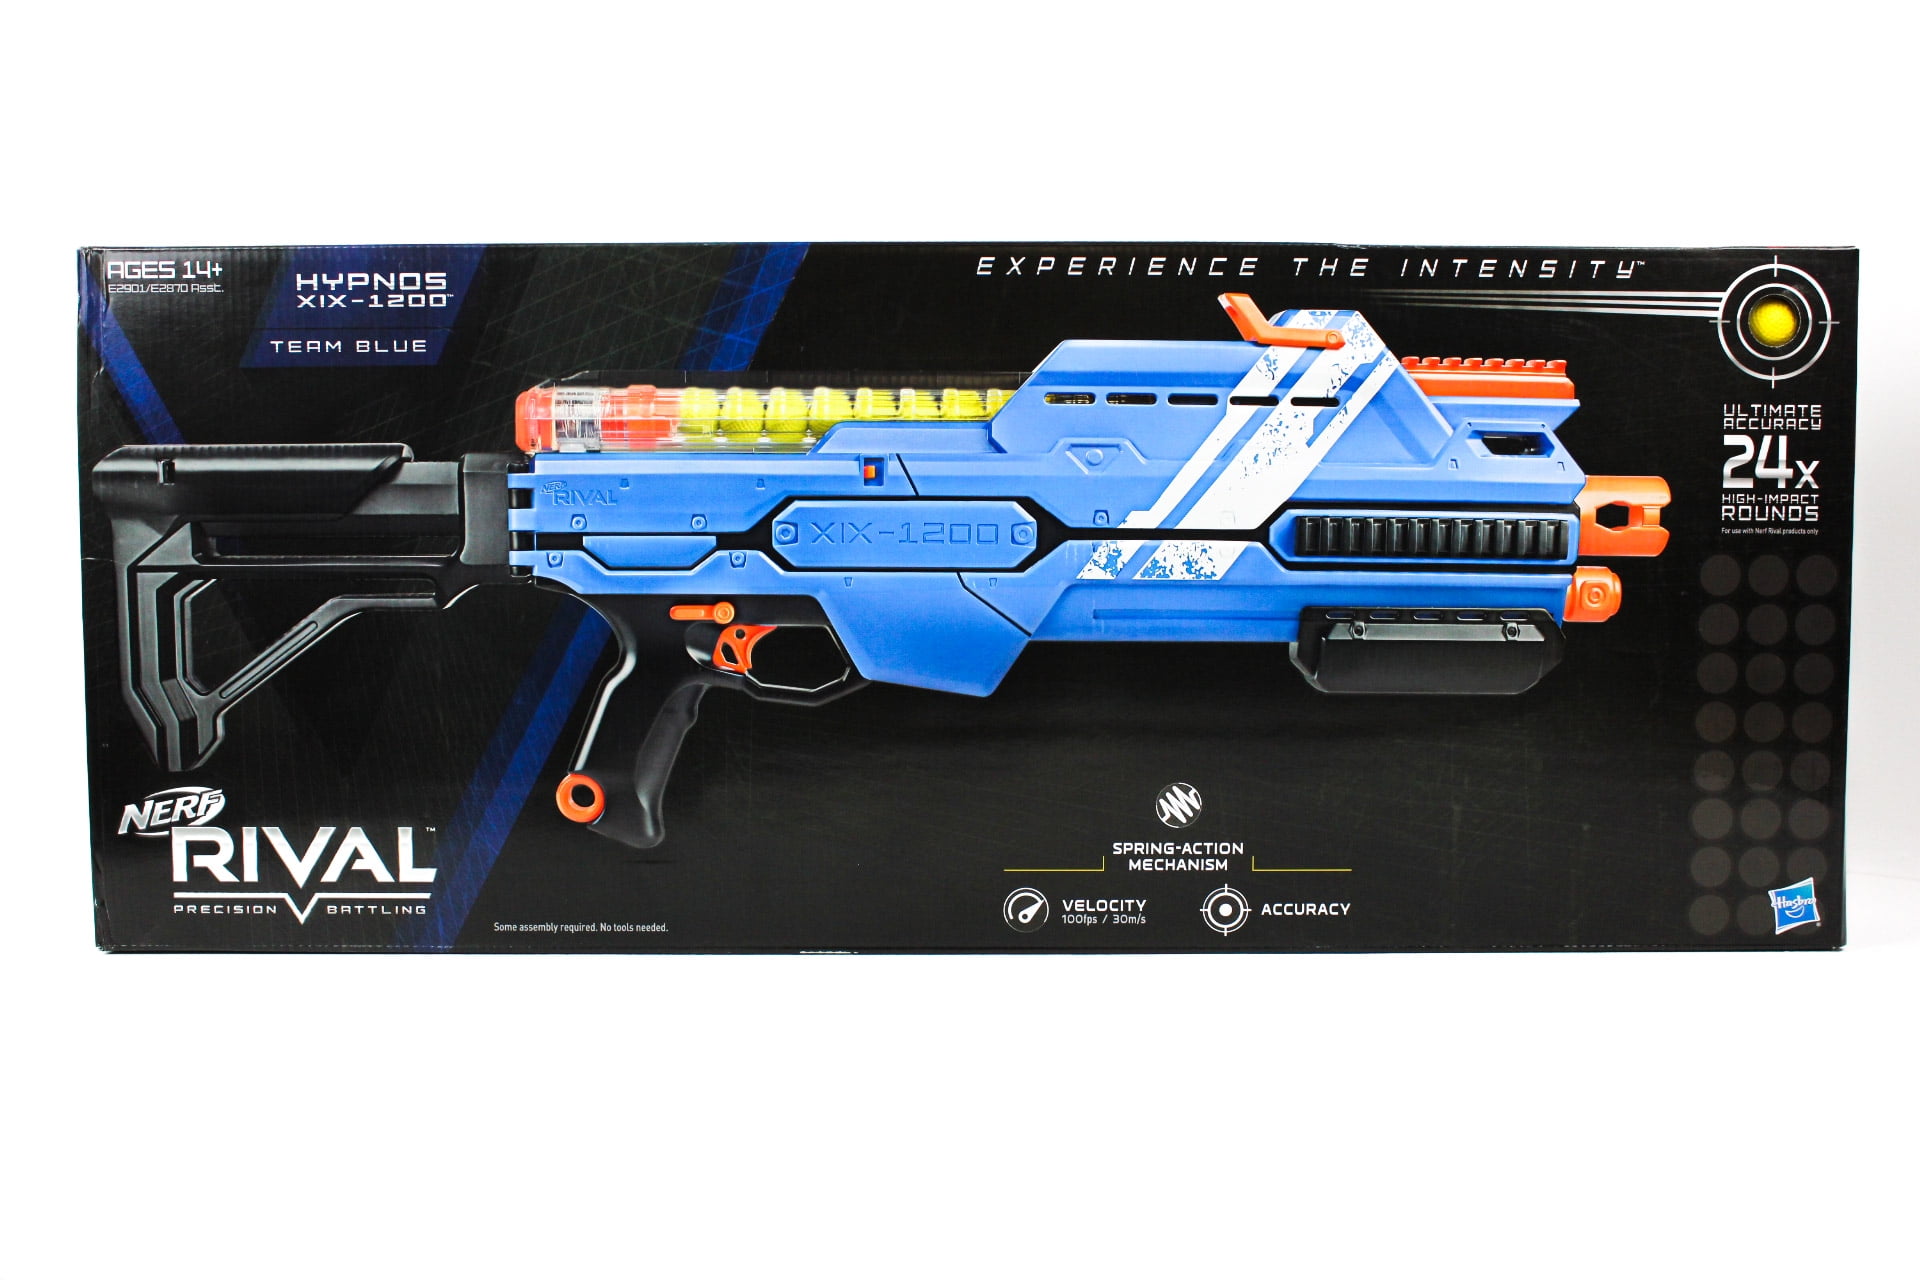 Nerf Rival Hypnos XIX-1200 Blaster Red Blue Ages 14 Toy Play Gun Fight Fire Fun 